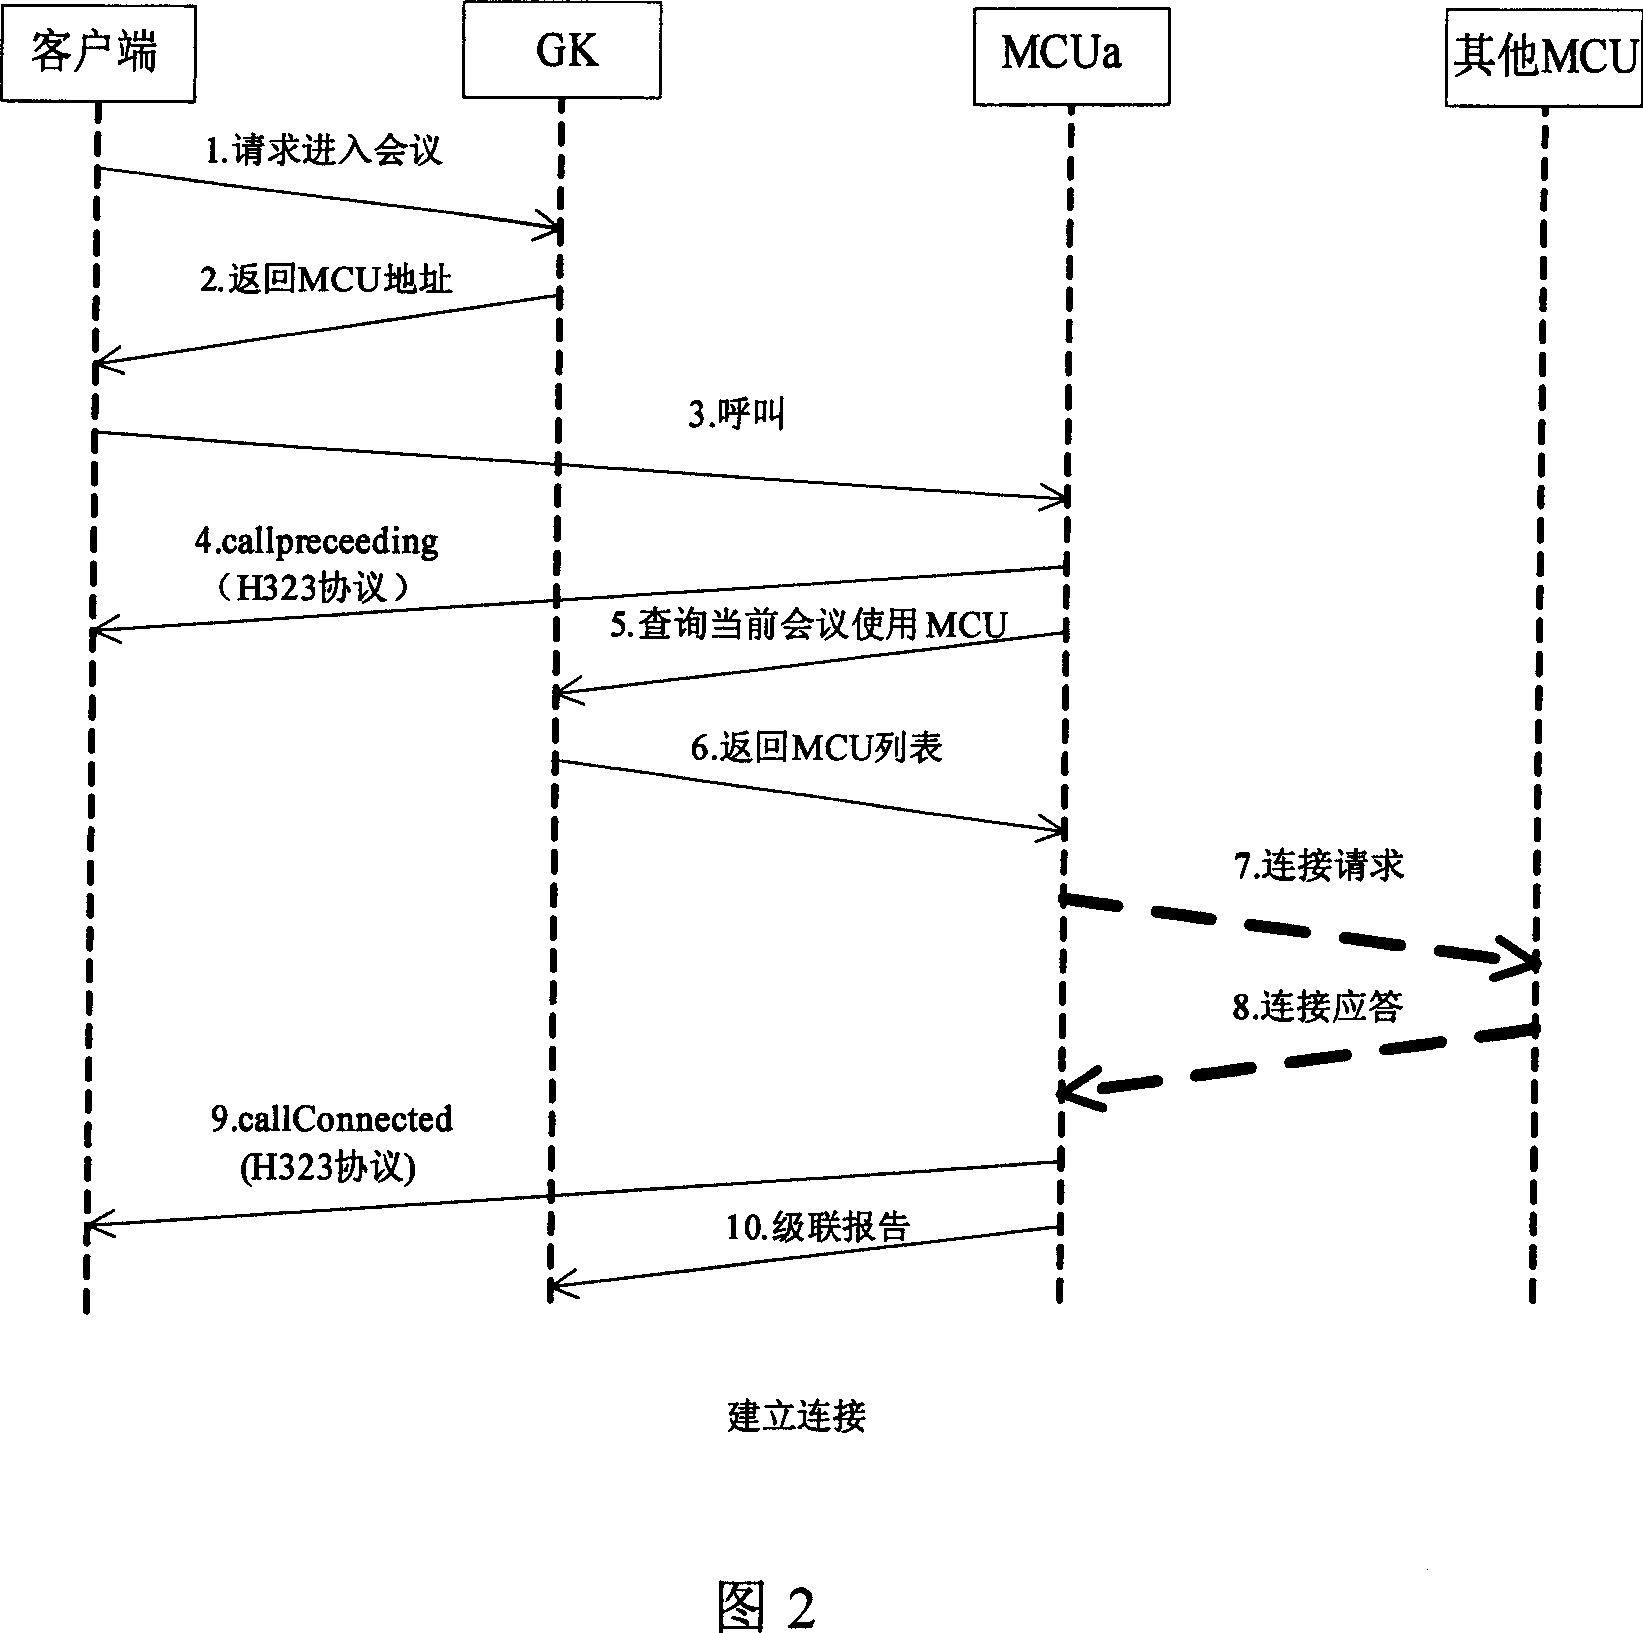 Audio mixing method in multiple-MCU video conference system